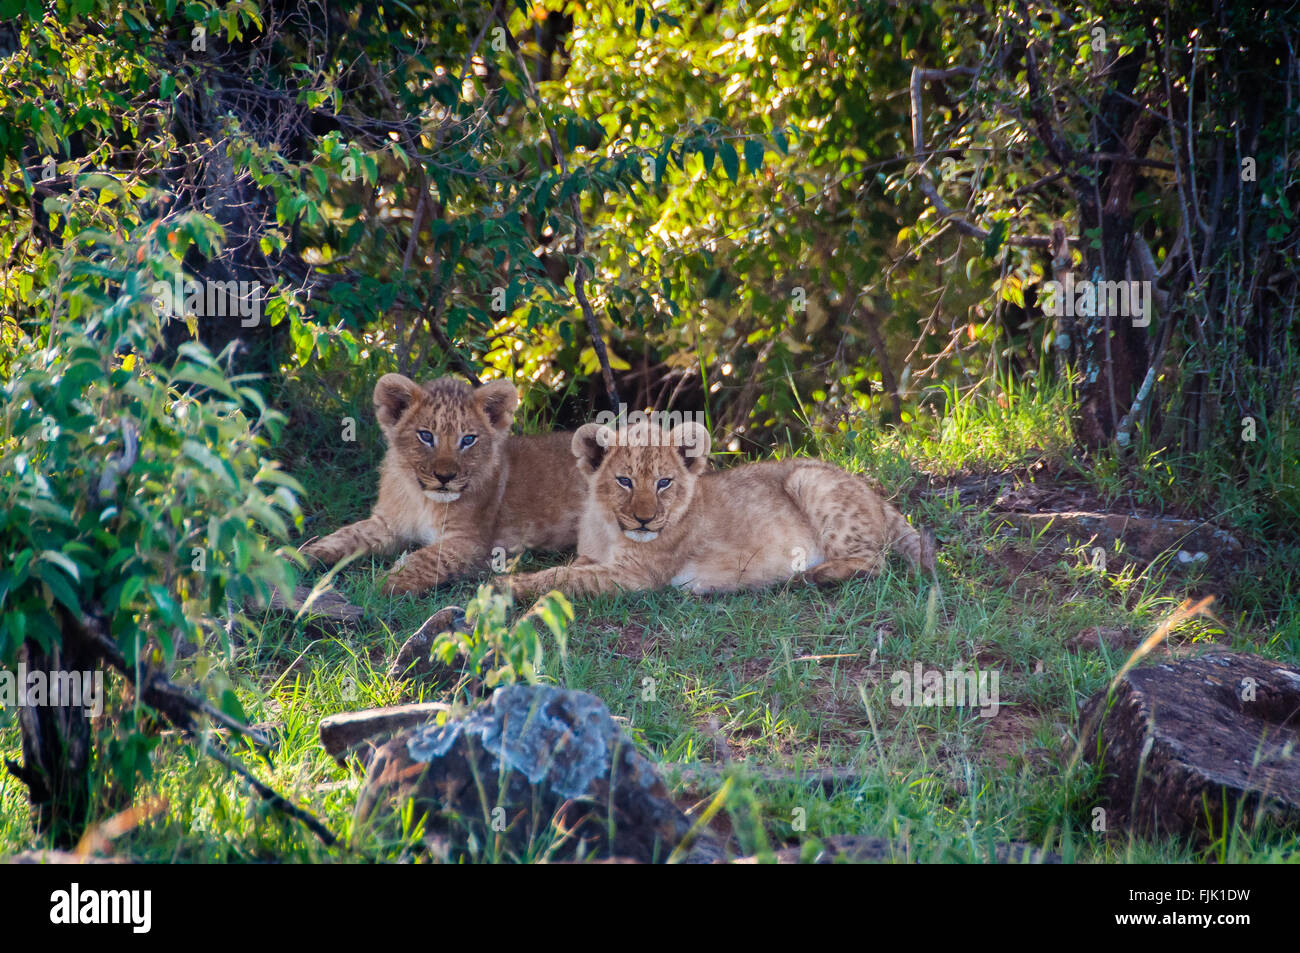 Two baby lion cubs in Africa on safari Stock Photo